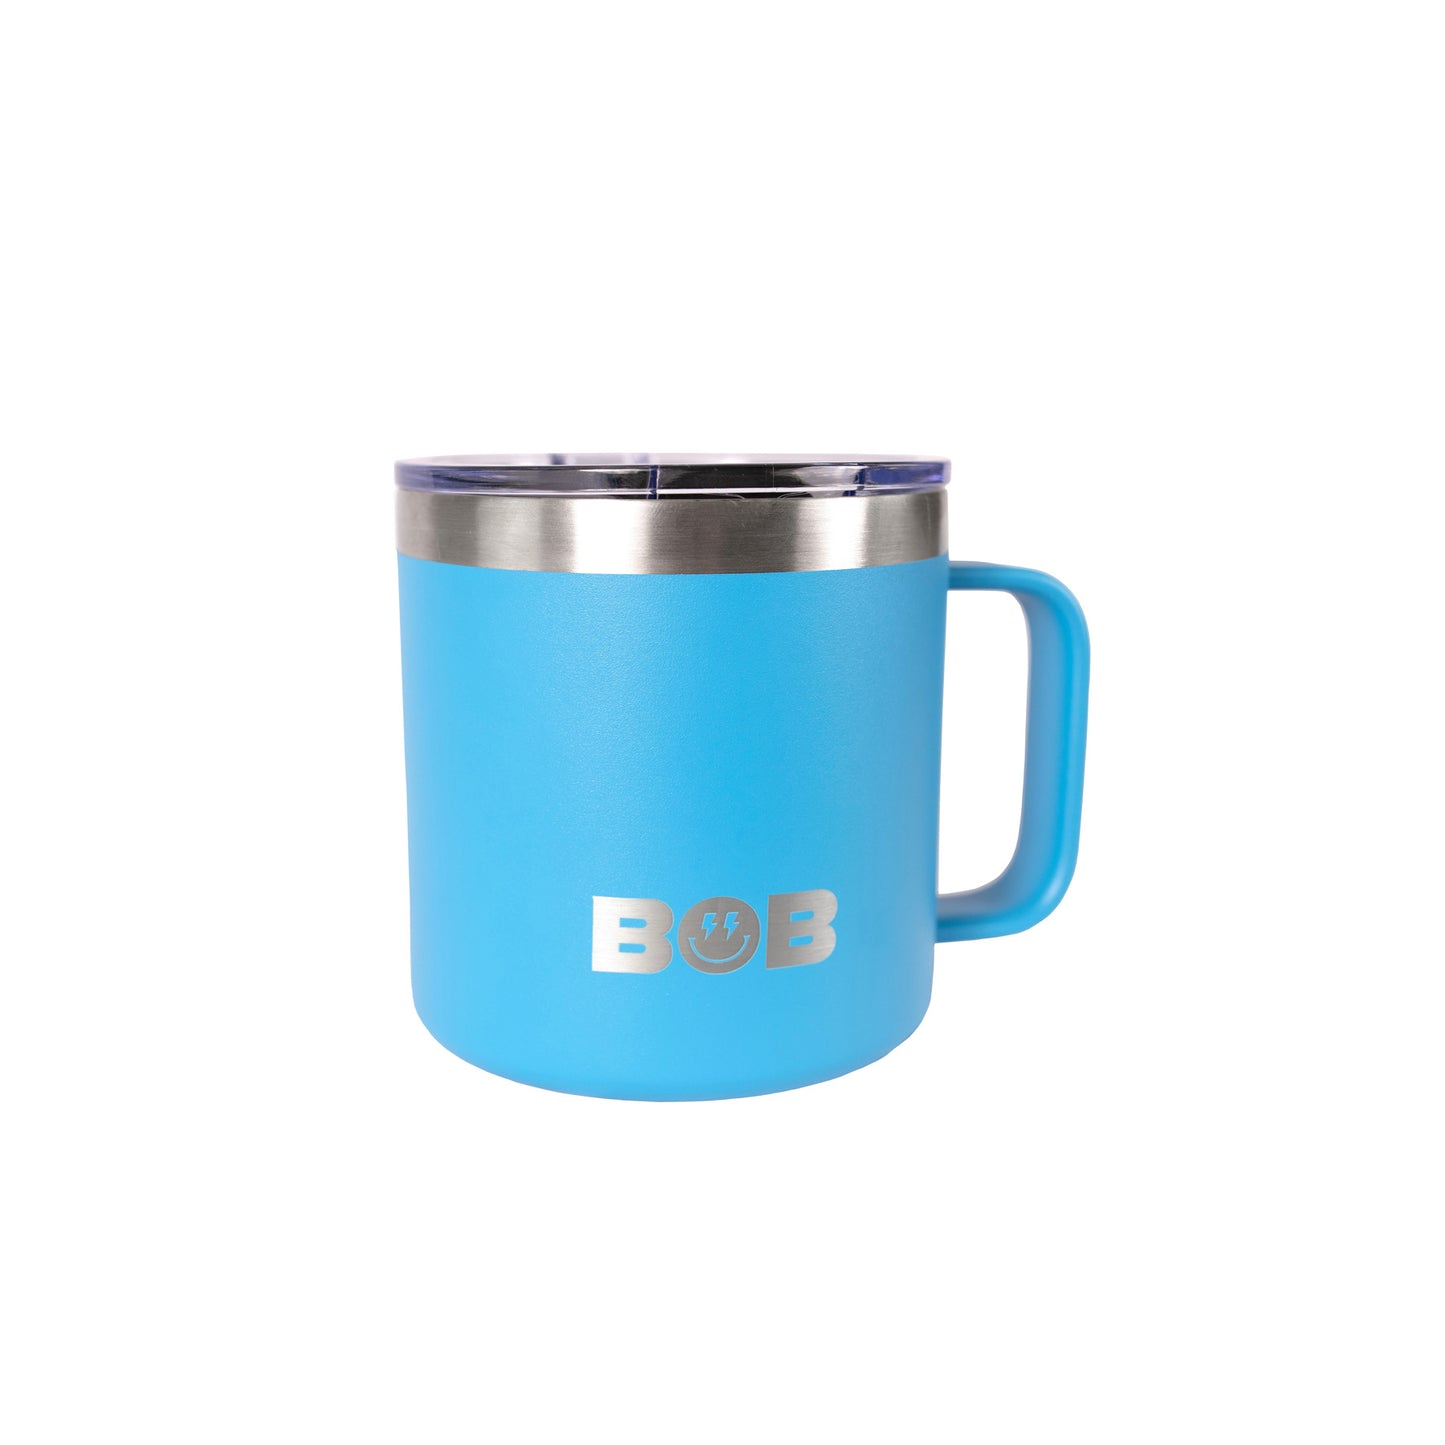 BOBs 14Oz Stainless Steel Double Wall Vacuum Insulated Coffee Mug with Lid and Handle by BOB The Cooler Co